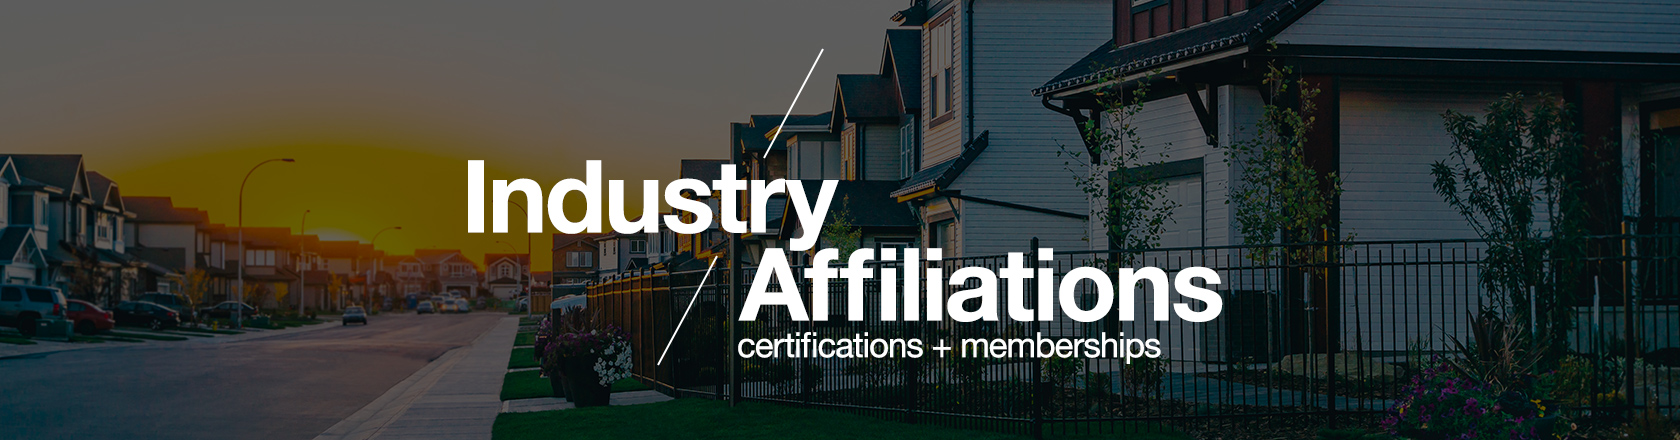 Industry Affiliations banner